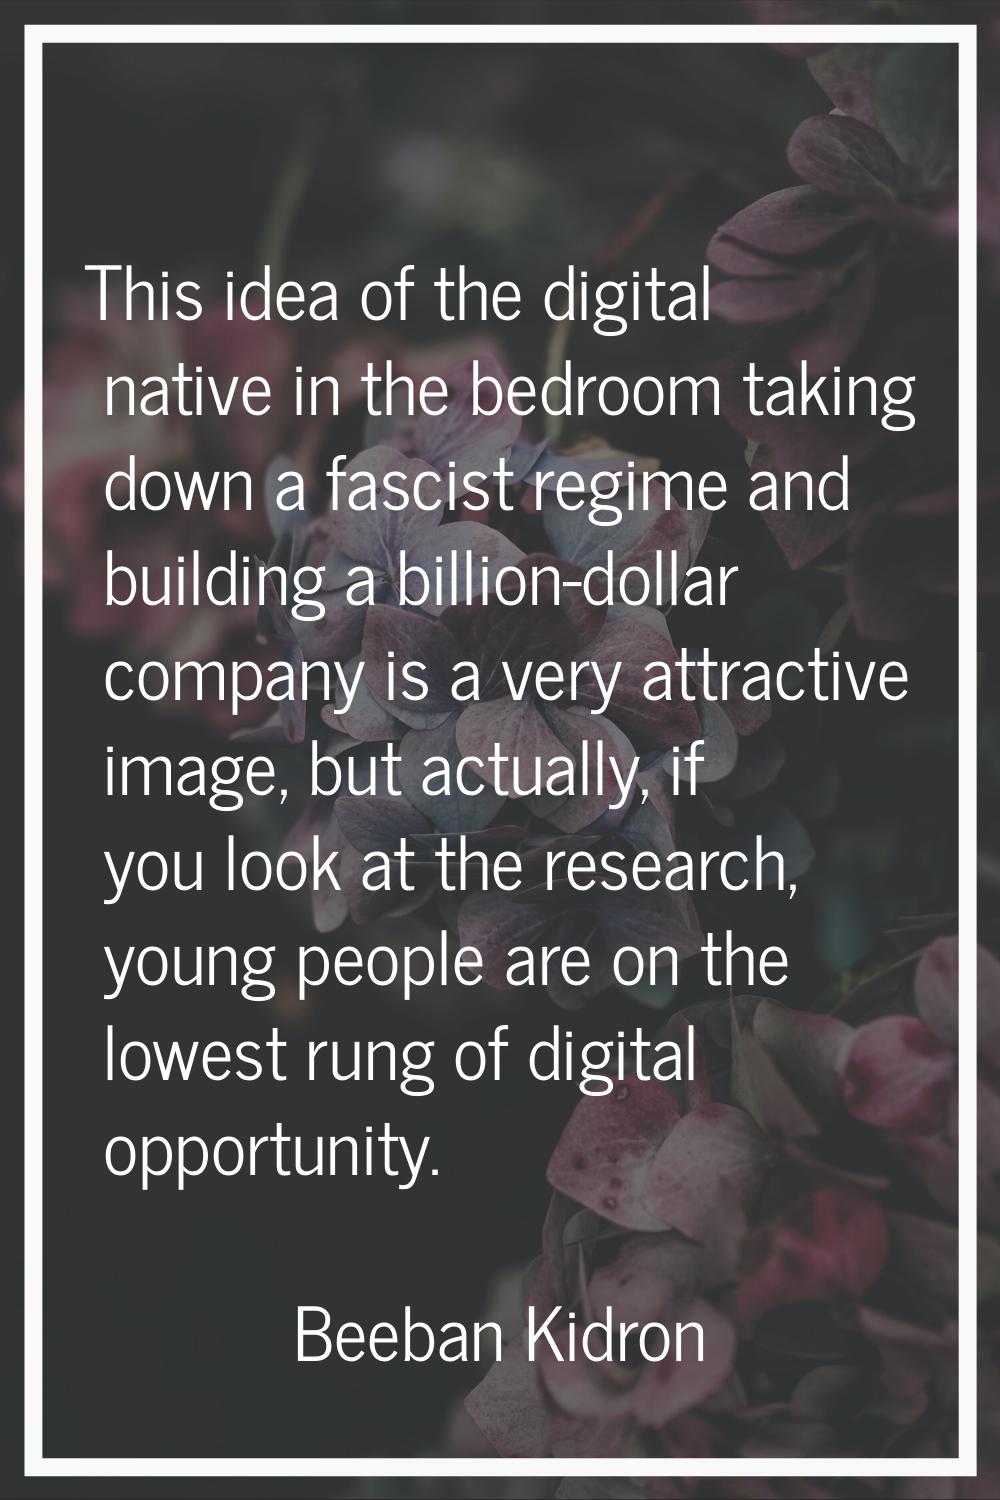 This idea of the digital native in the bedroom taking down a fascist regime and building a billion-